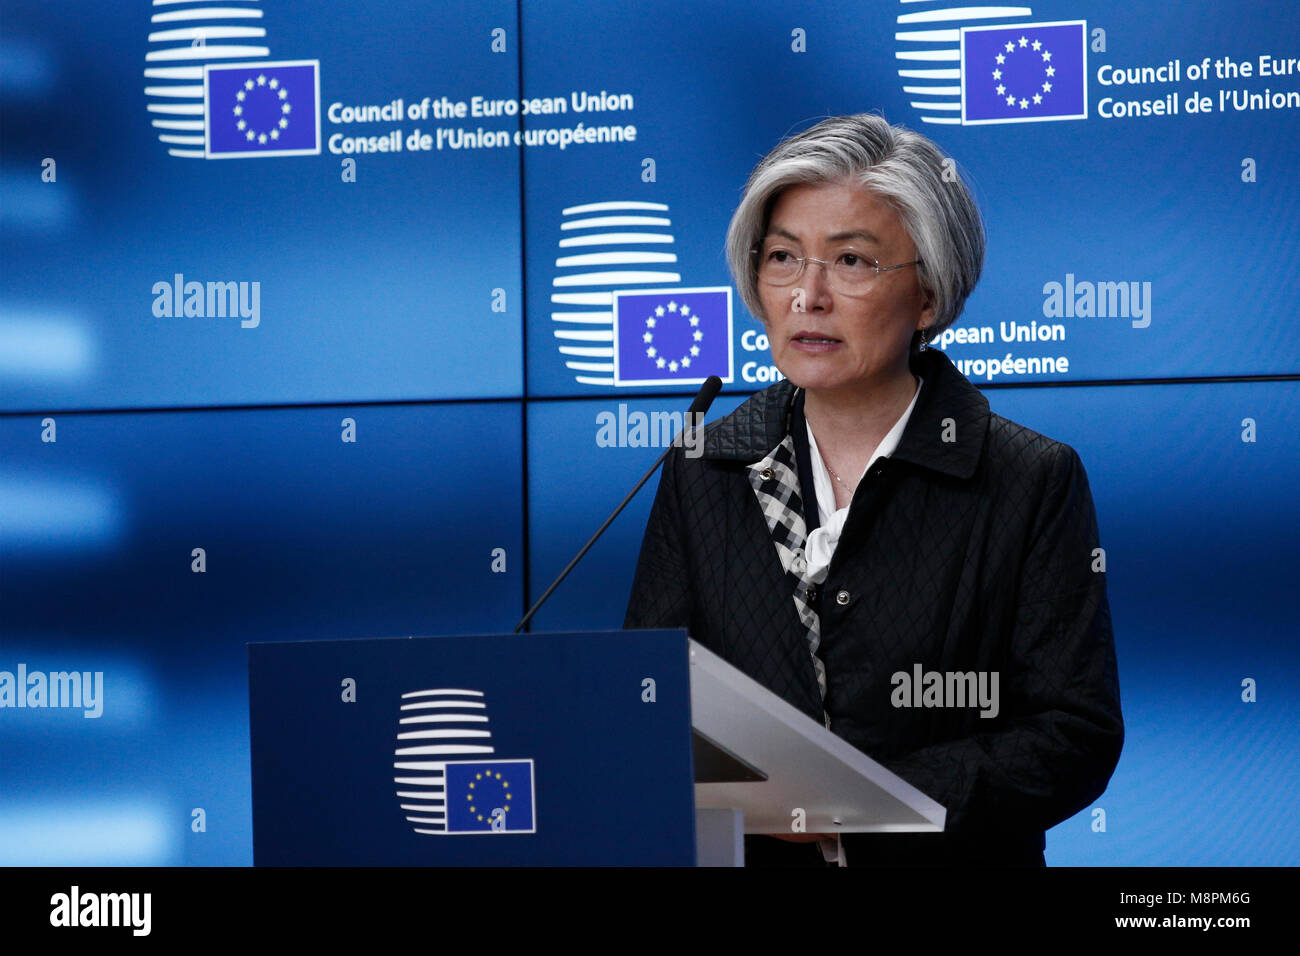 Brussels, Belgium. 19th March 2018. Federica Mogherini, High Representative of the Union for Foreign Affairs and Security Policy and Vice-President of the EC and Kang Kyung-wha, Minister of Foreign Affairs of Republic of Korea give a press conference. Alexandros Michailidis/Alamy Live News Stock Photo